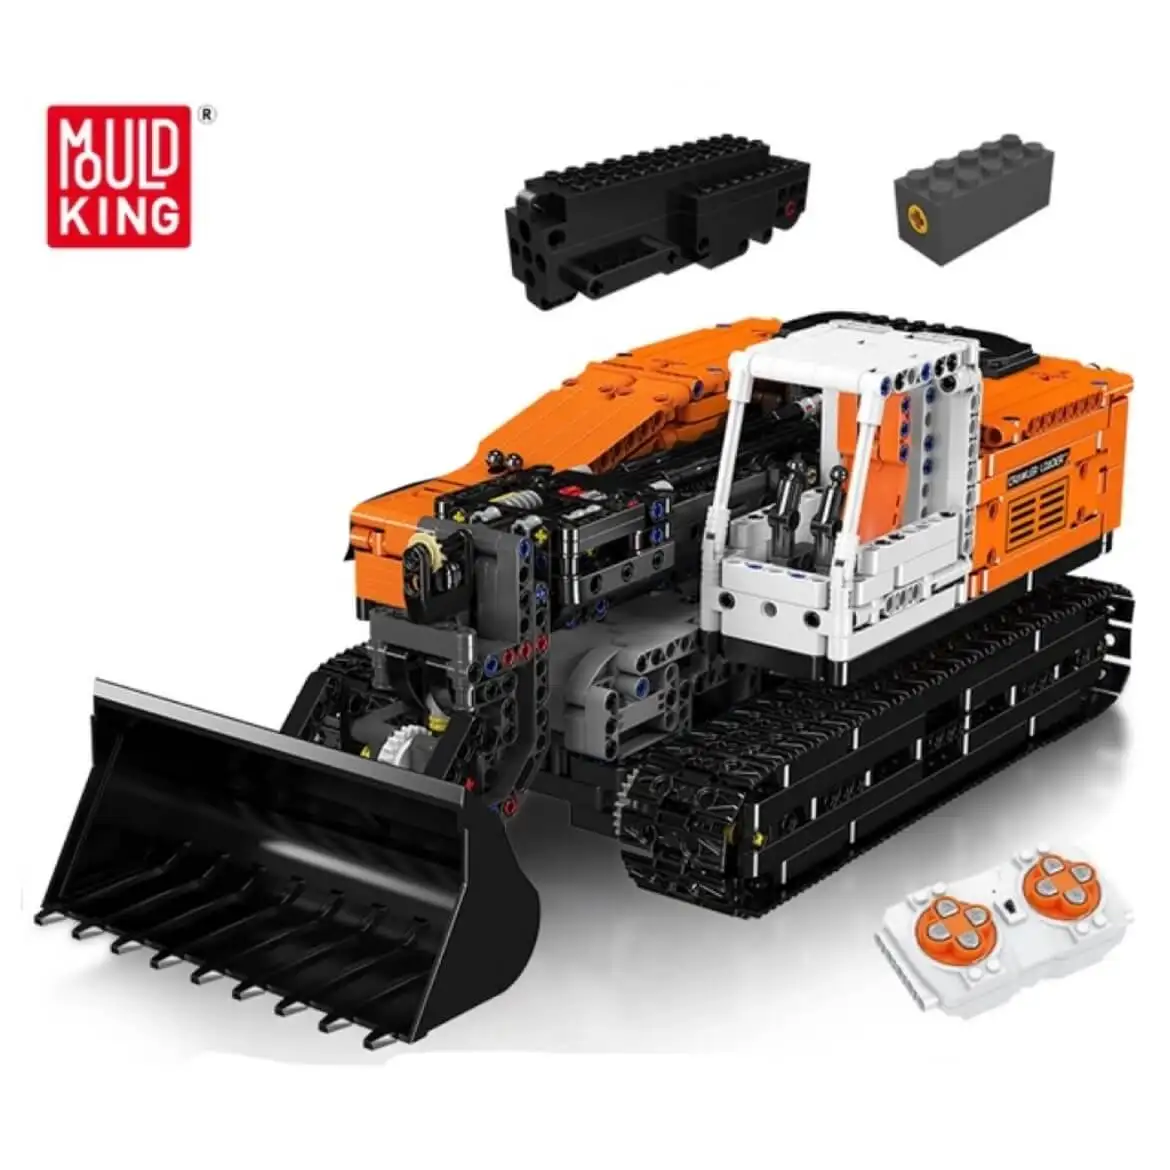 

Mould King 17054 Technical Car Building Block The APP&RC Motorized Gopher Loader Model Assembly Truck Brick Kids Christmas Gift